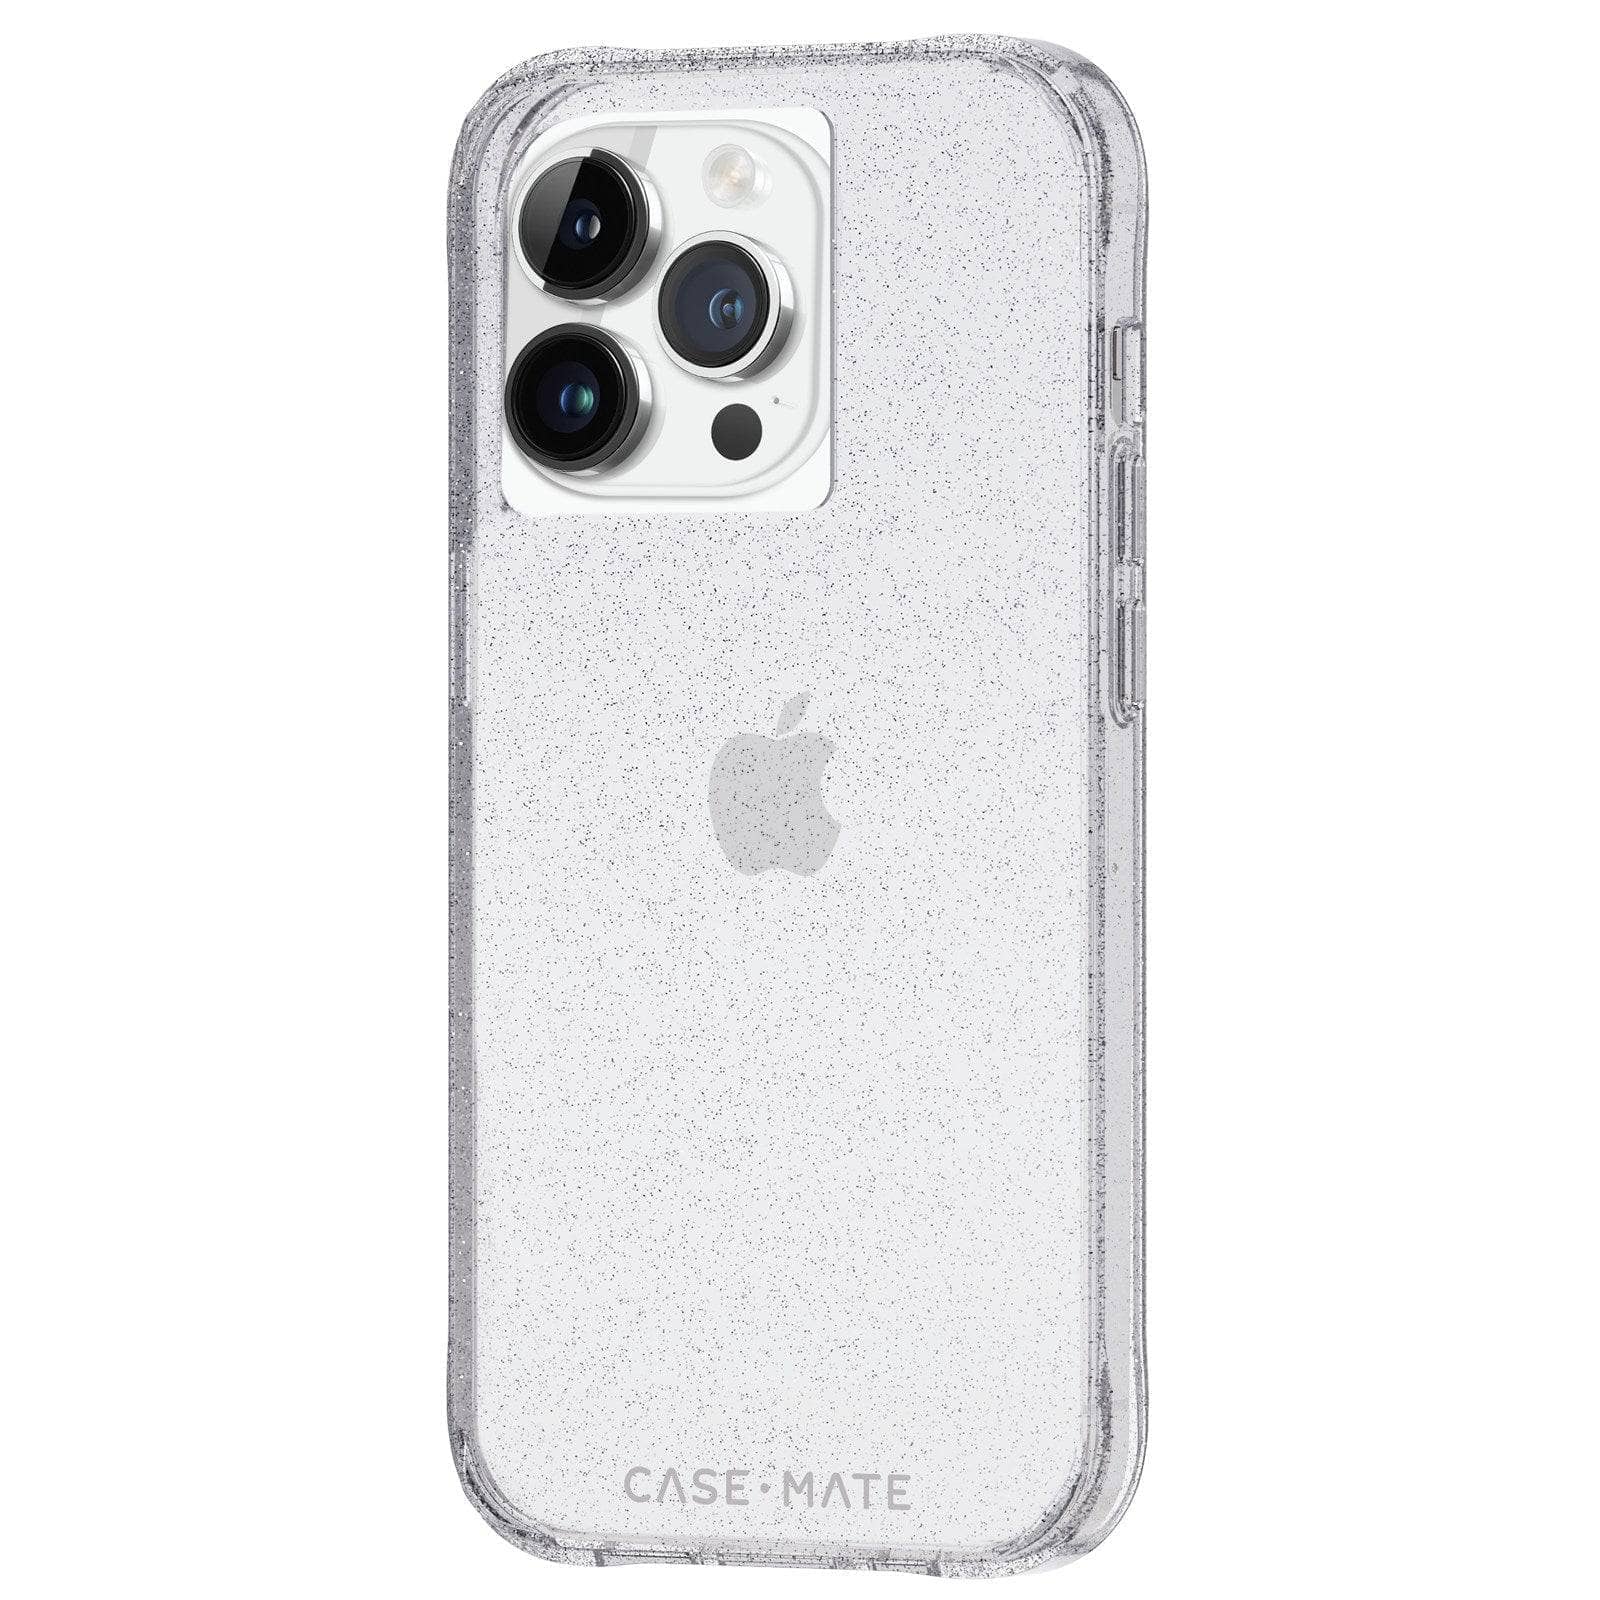 Case-Mate Sheer Crystal Case - For iPhone 14 Pro (6.1")-Cases - Cases-CASE-MATE-www.PhoneGuy.com.au